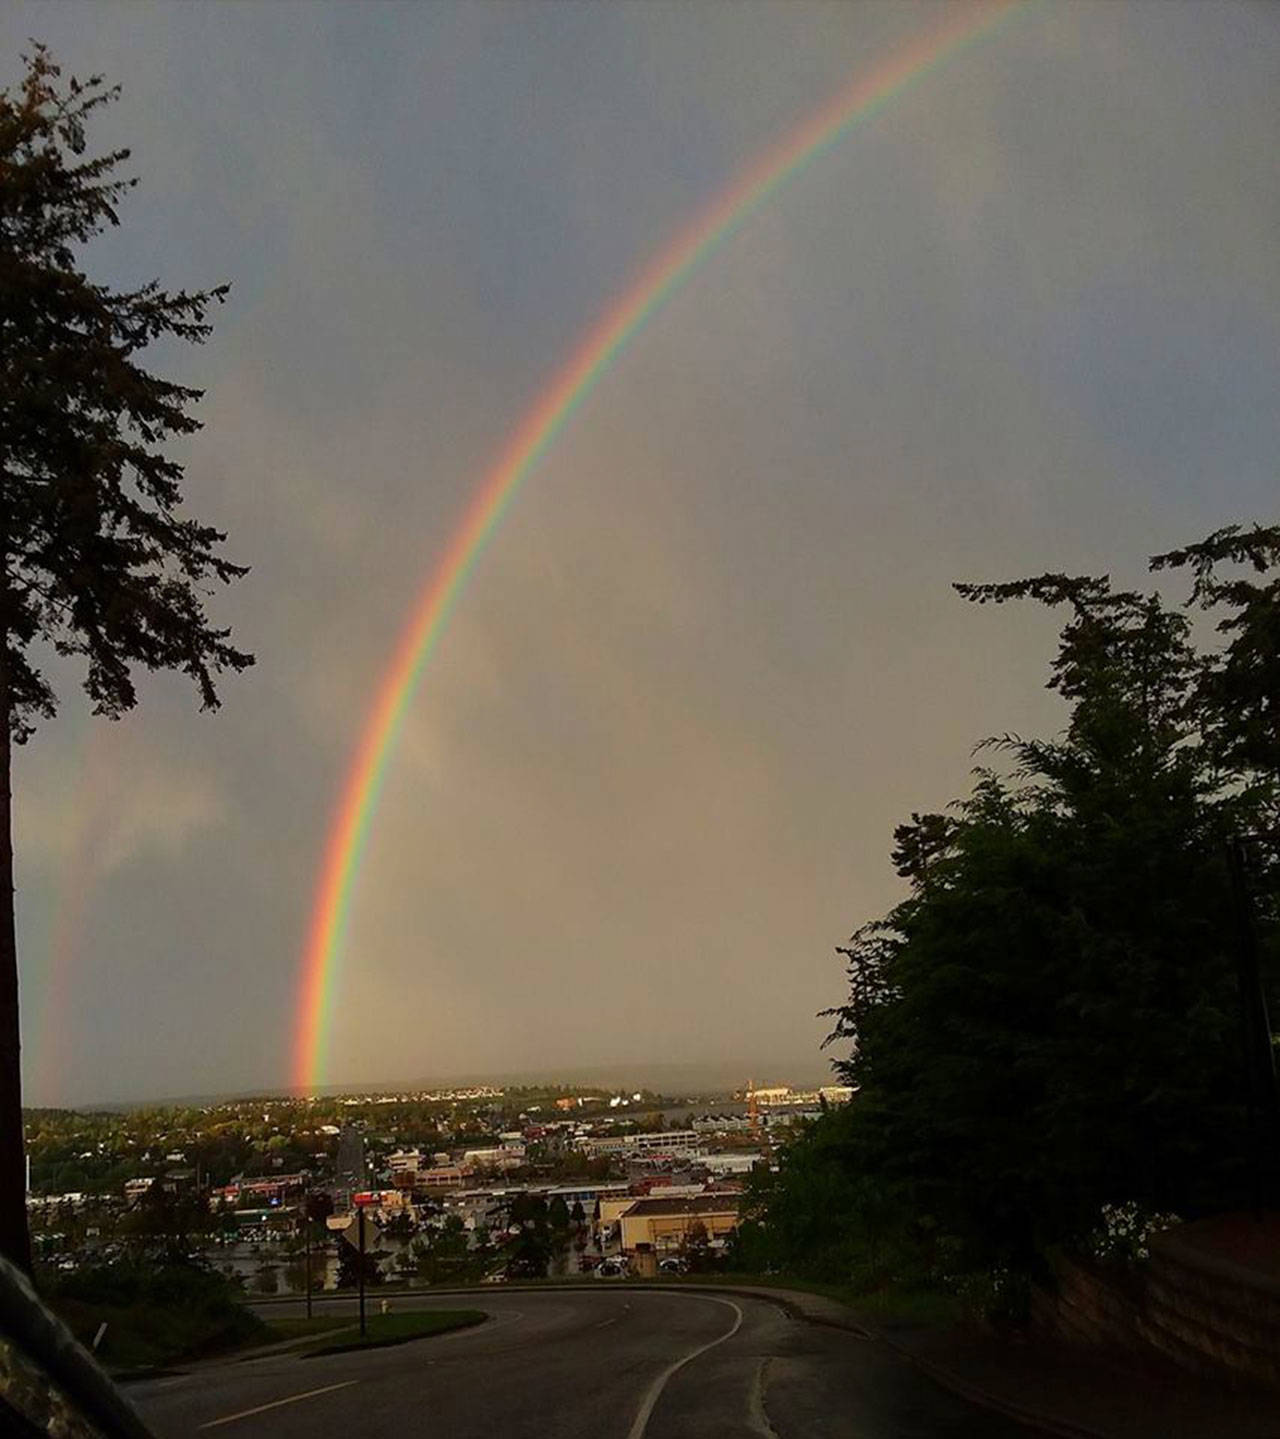 A rainbow arcs over Oak Harbor earlier this spring. At left, a second band shows up faintly. Photo by Wilma Vernon LeDuc‎